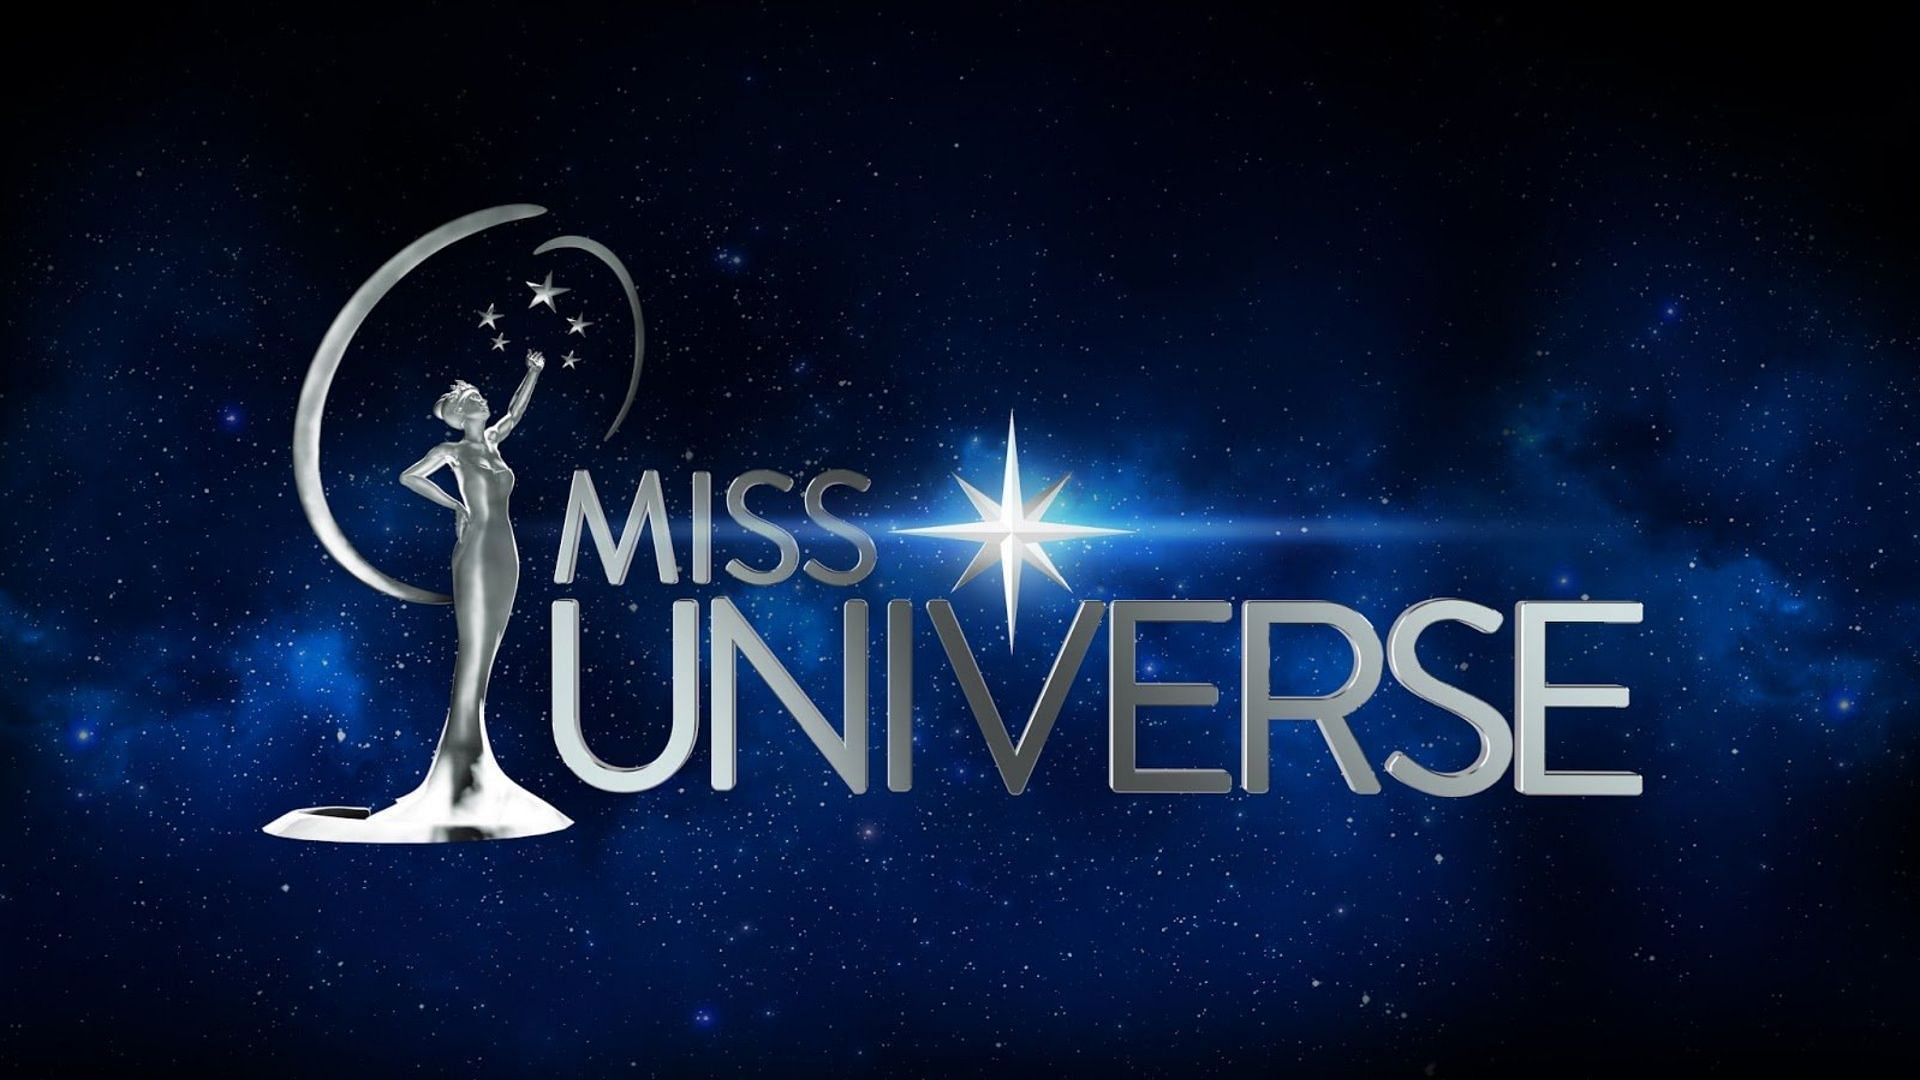 Viral claim about Miss USA boycotting Miss Universe over transgender participation has been debunked. (Image via missworldbulgaria.org)